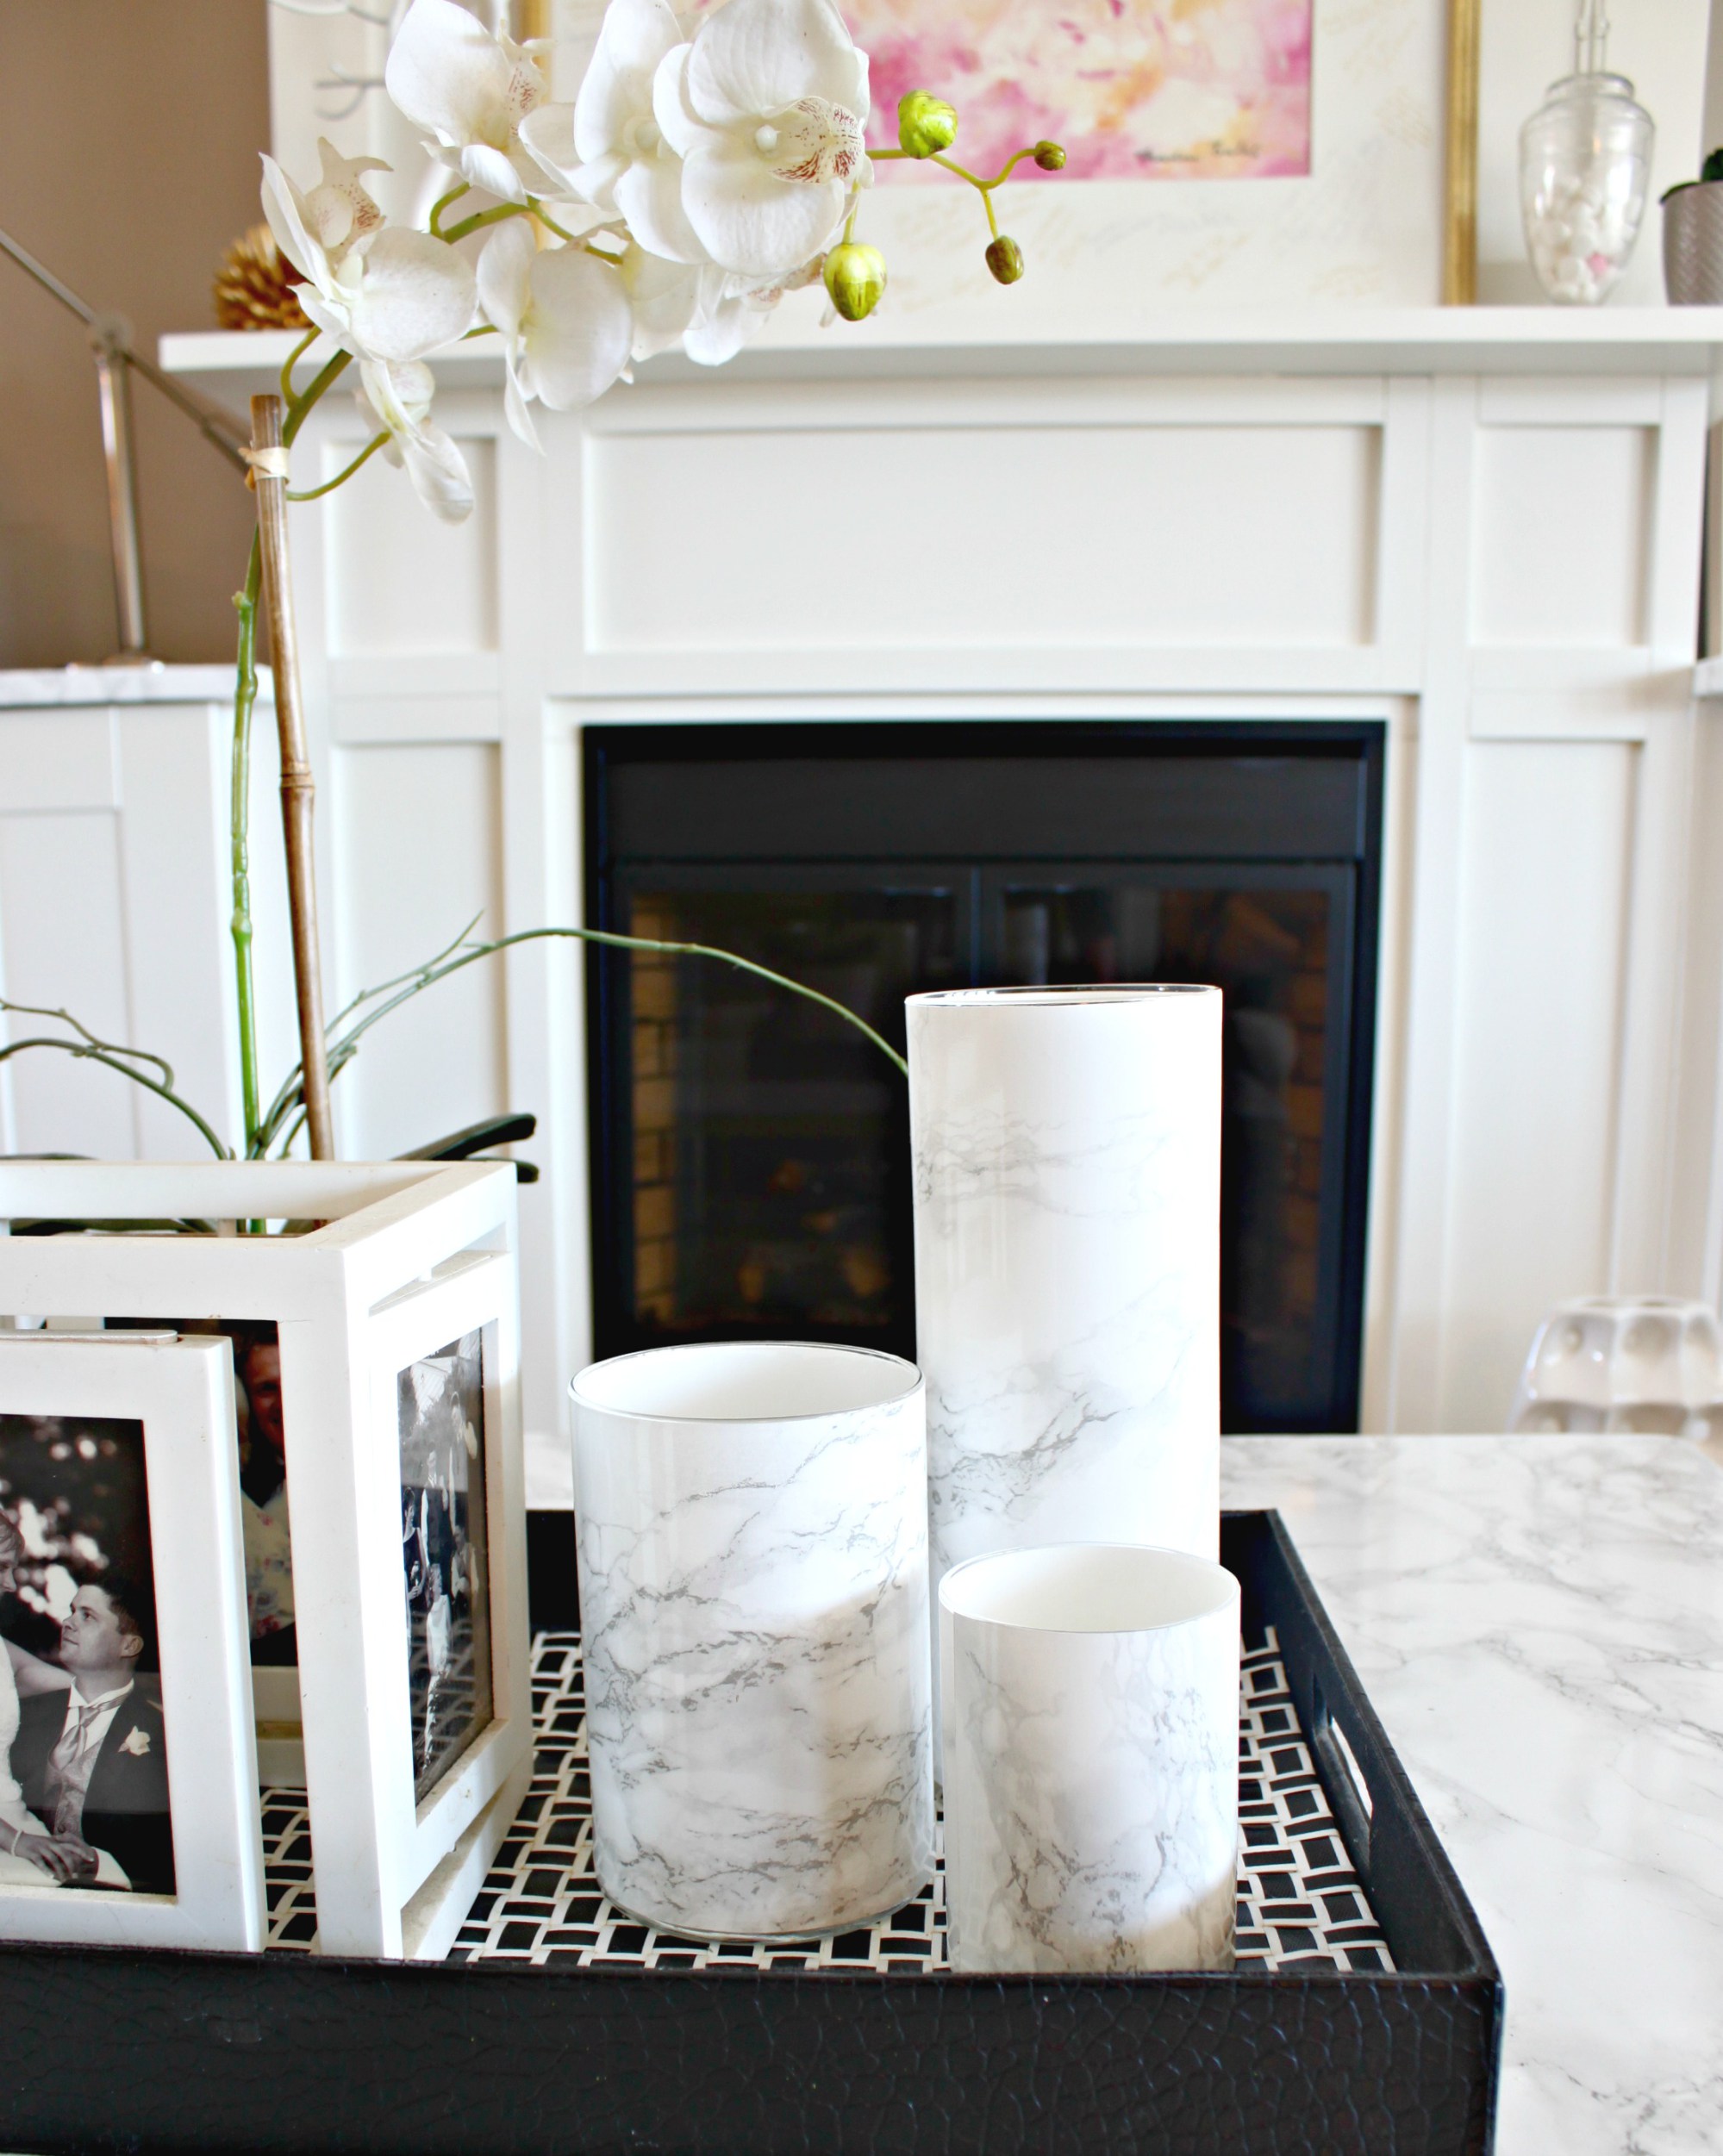 Trendy Faux Marble Decor To Make Your Home Look Expensive - Page 2 of 3